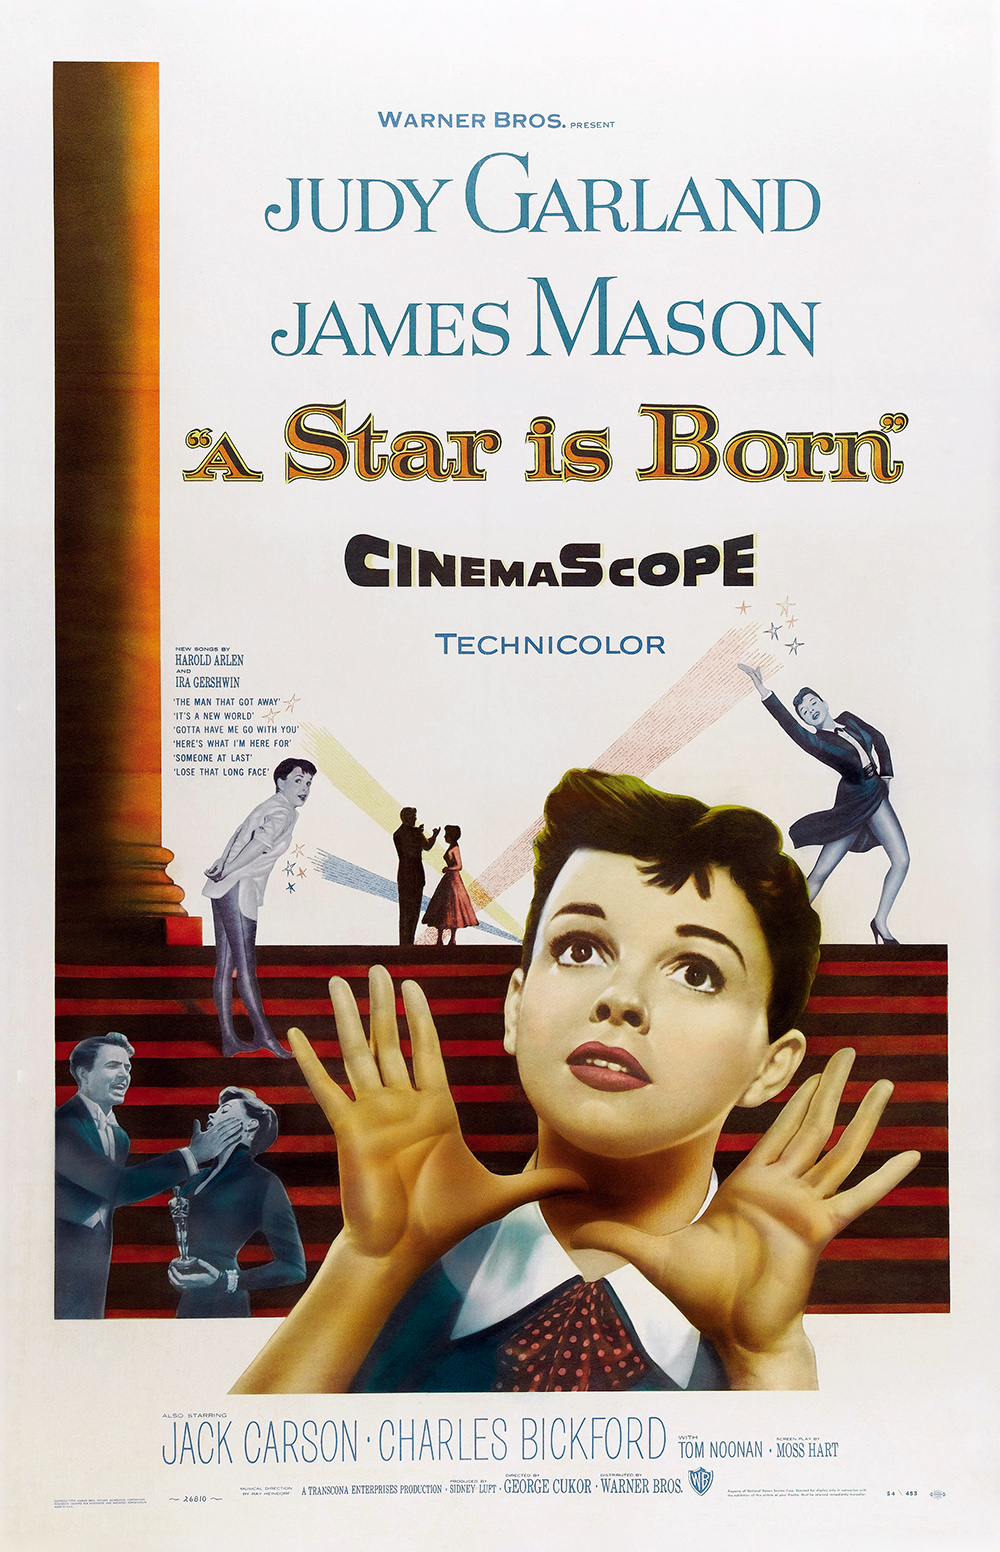 A Star is Born (1954)